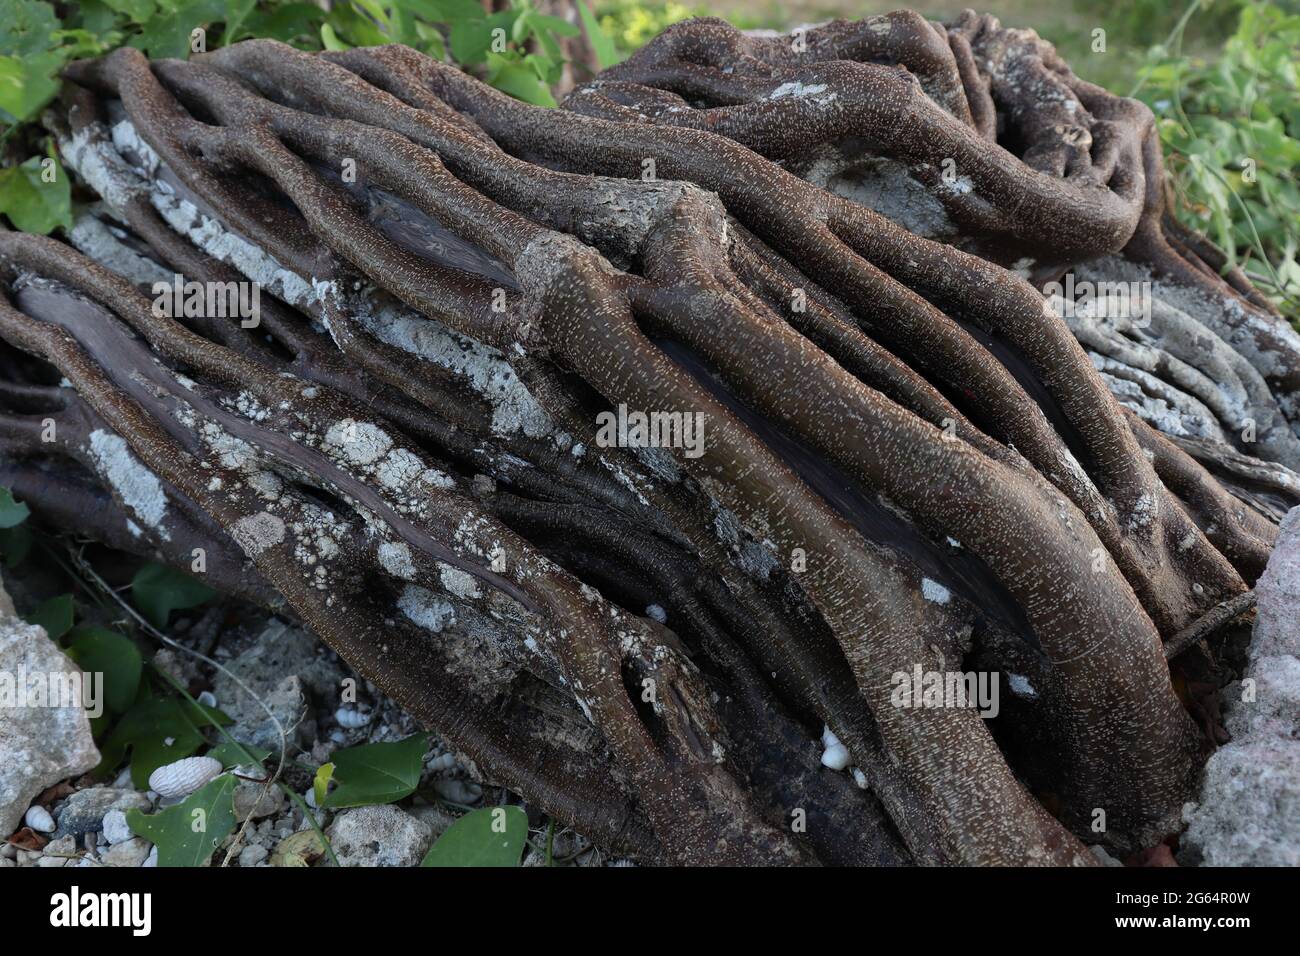 Large roots of tree with stone. Tropical tree. Stock Photo